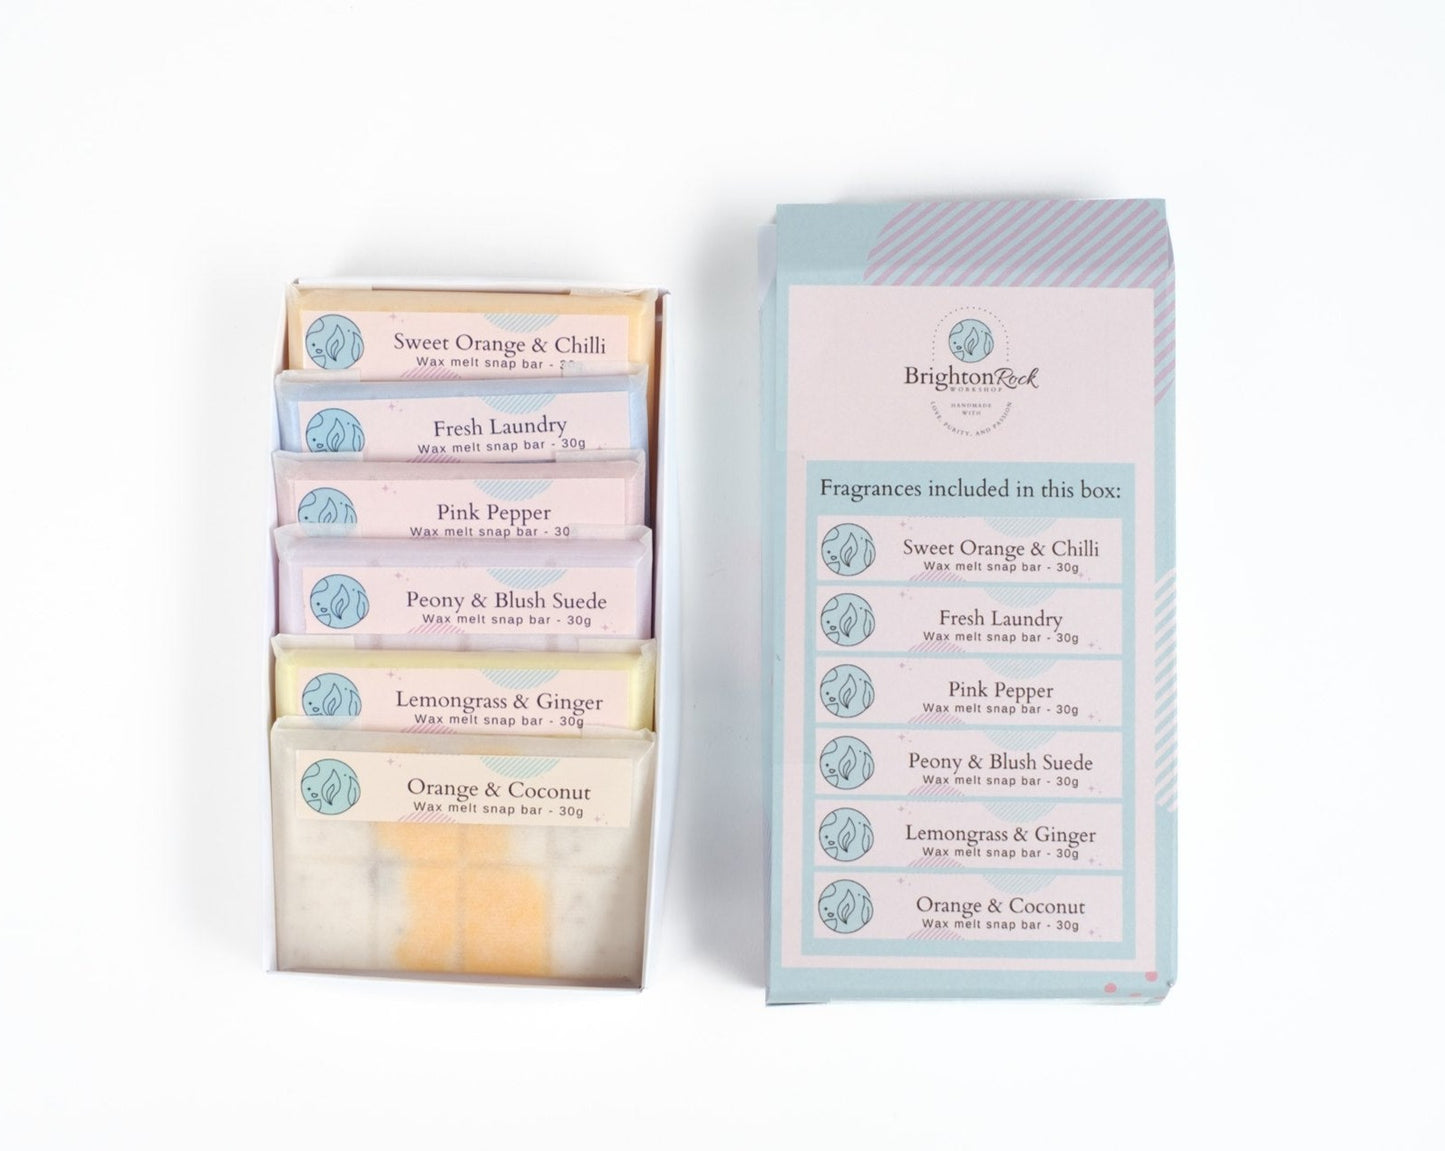 Fresh fragrances Brighton Rock Workshop wax melt snap bar selection box. enjoy 6 30 gram bars in our best selling fresh scents. Eco friendly product and packaging. sustainable, vegan friendly and cruelty free